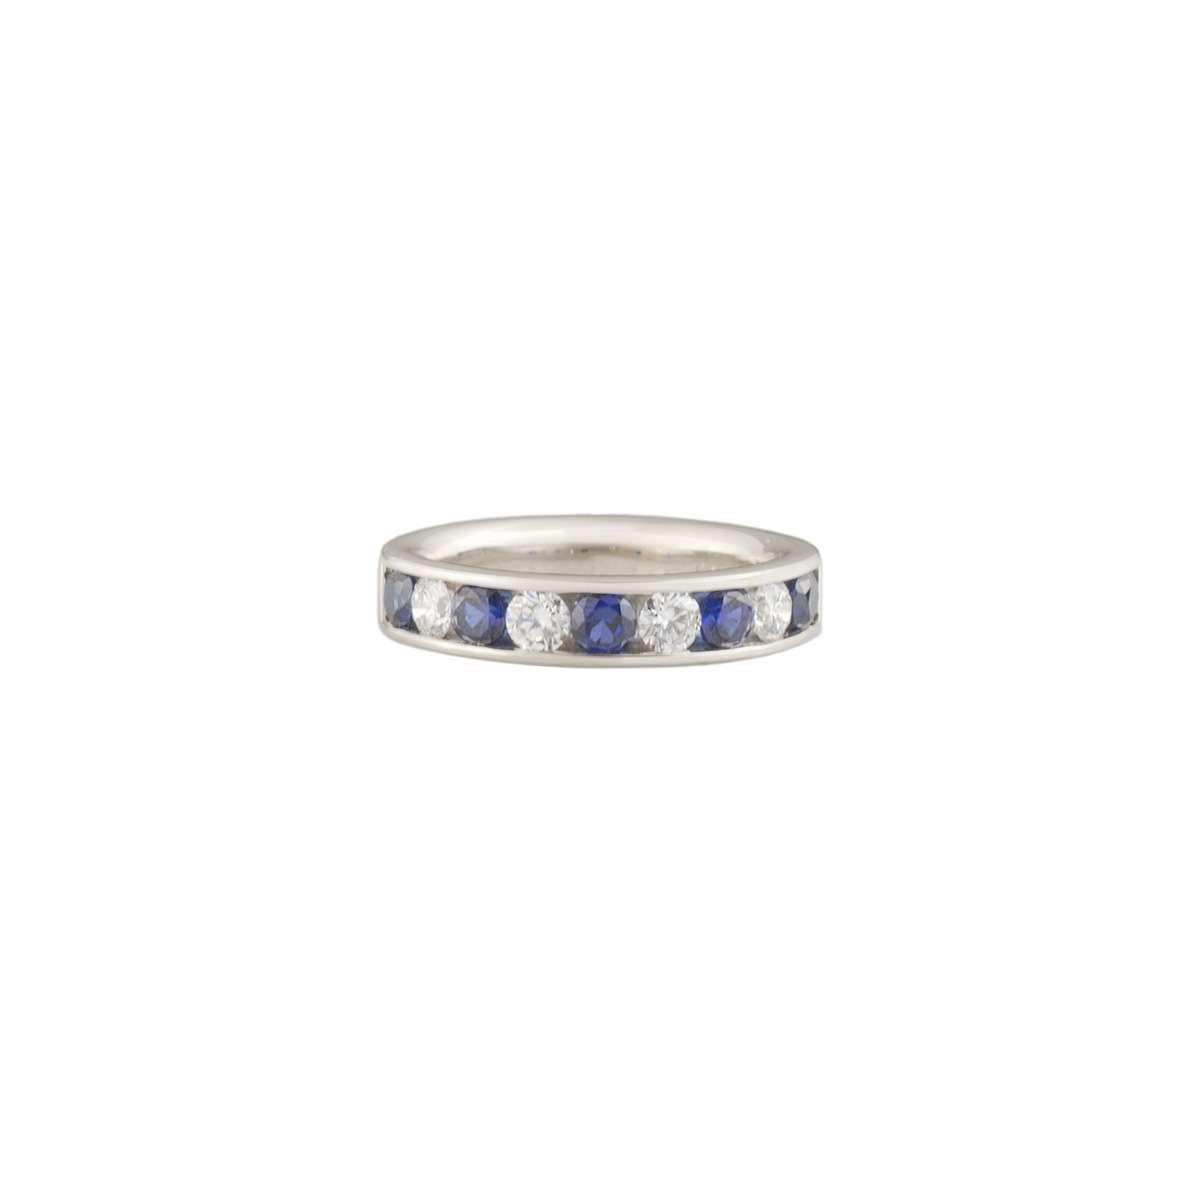 A lovely platinum diamond and sapphire half eternity ring. The ring comprises of 4 round brilliant cut diamonds alternating with 5 round brilliant cut sapphires. The diamonds have a total weight of approximately 0.40ct, G colour and VS clarity. The